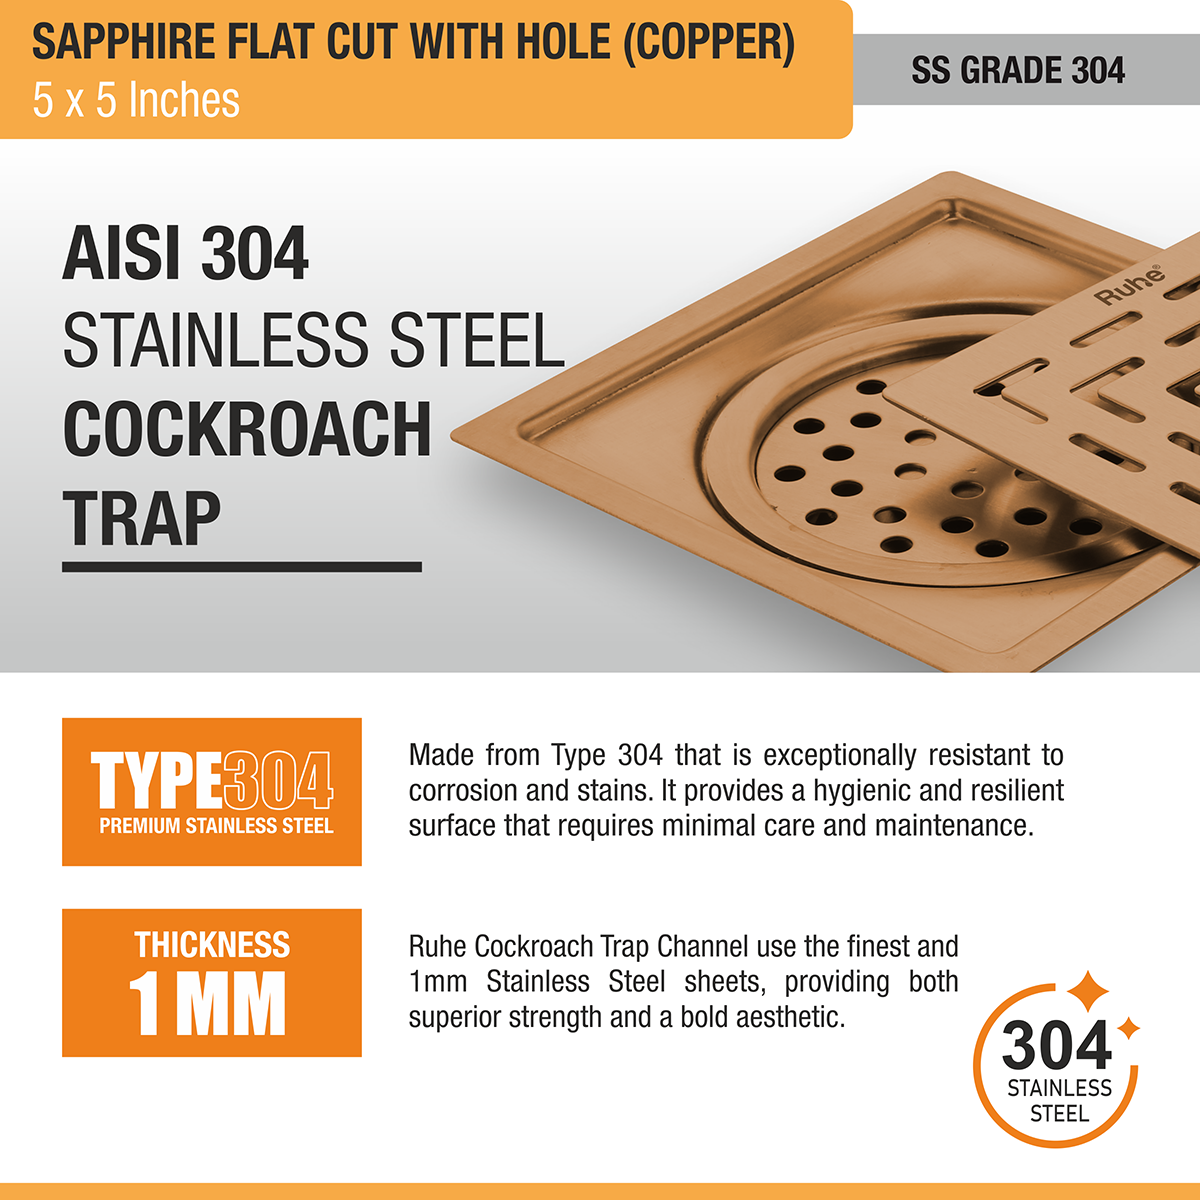 Sapphire Square Flat Cut Floor Drain in Antique Copper PVD Coating (5 x 5 Inches) with Hole stainless steel